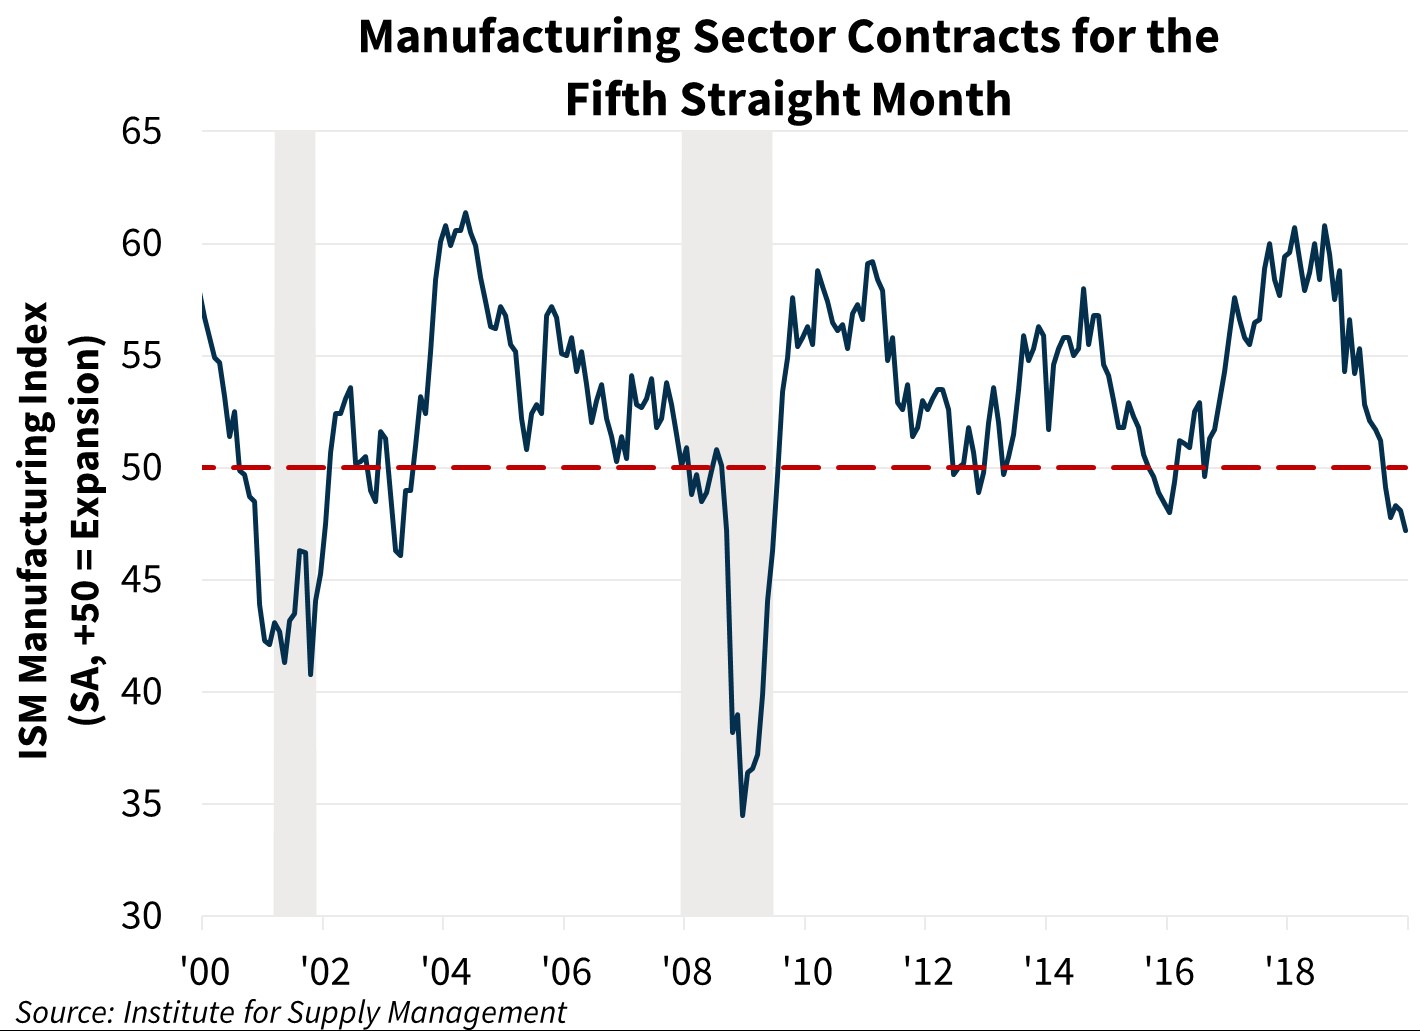 Manufacturing Sector Contracts for the Fifth Straight Month